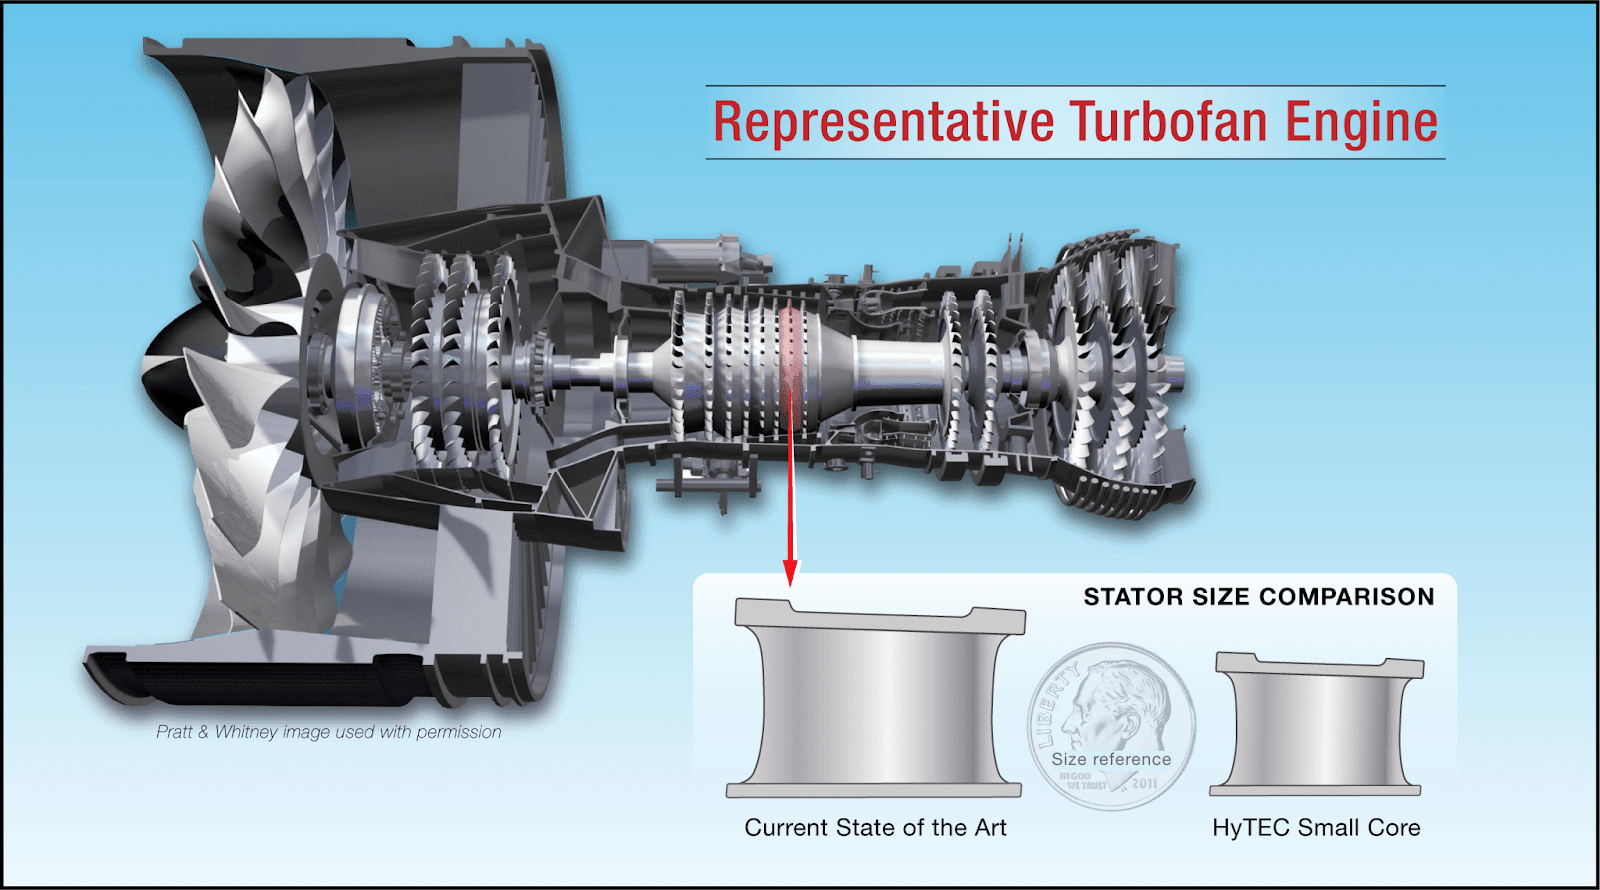 Cutaway illustration of engine and size comparison of core components.